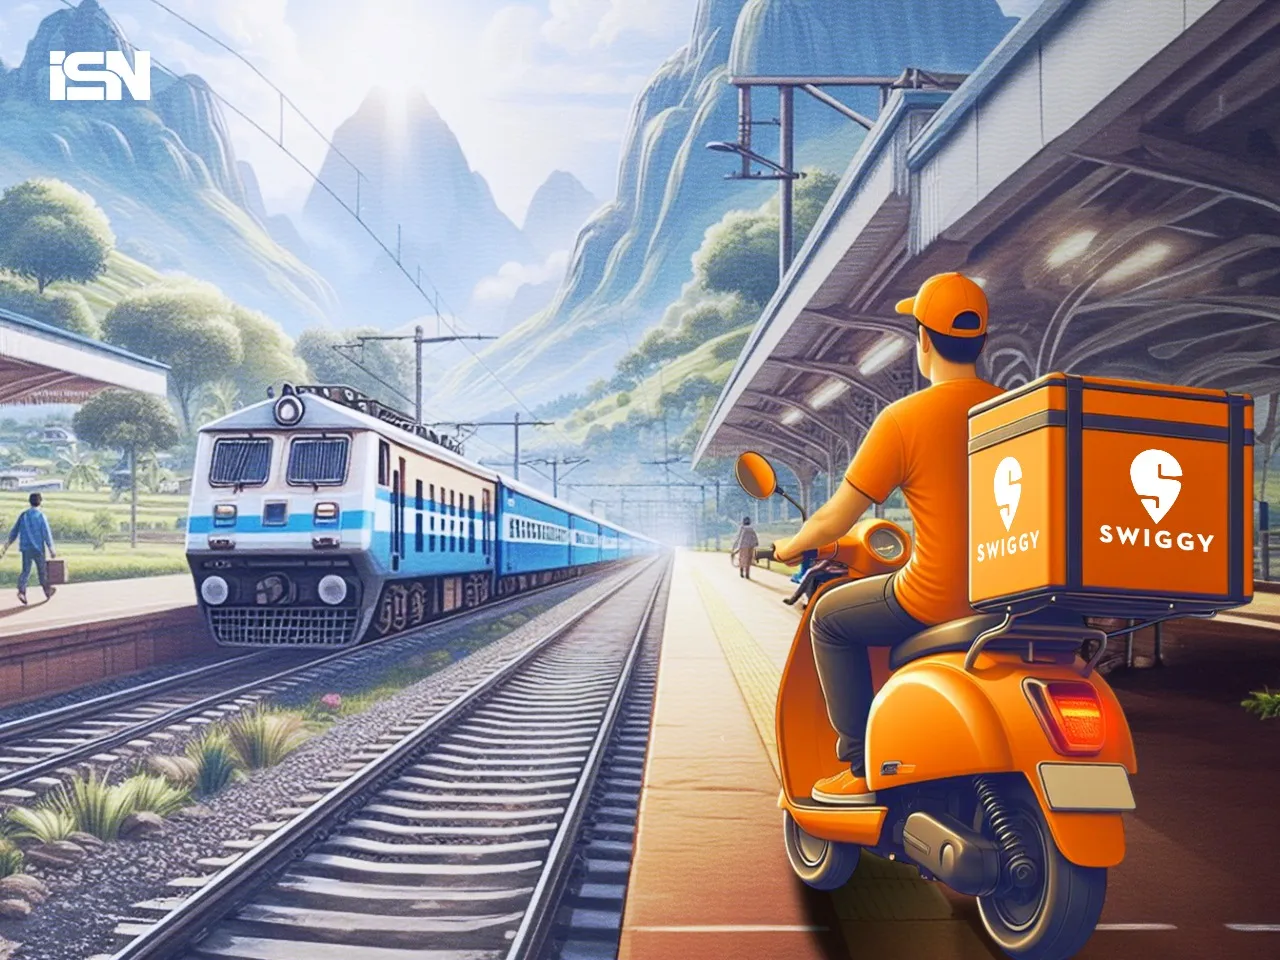 IRCTC partners with Swiggy for supply and delivery of pre-ordered meals